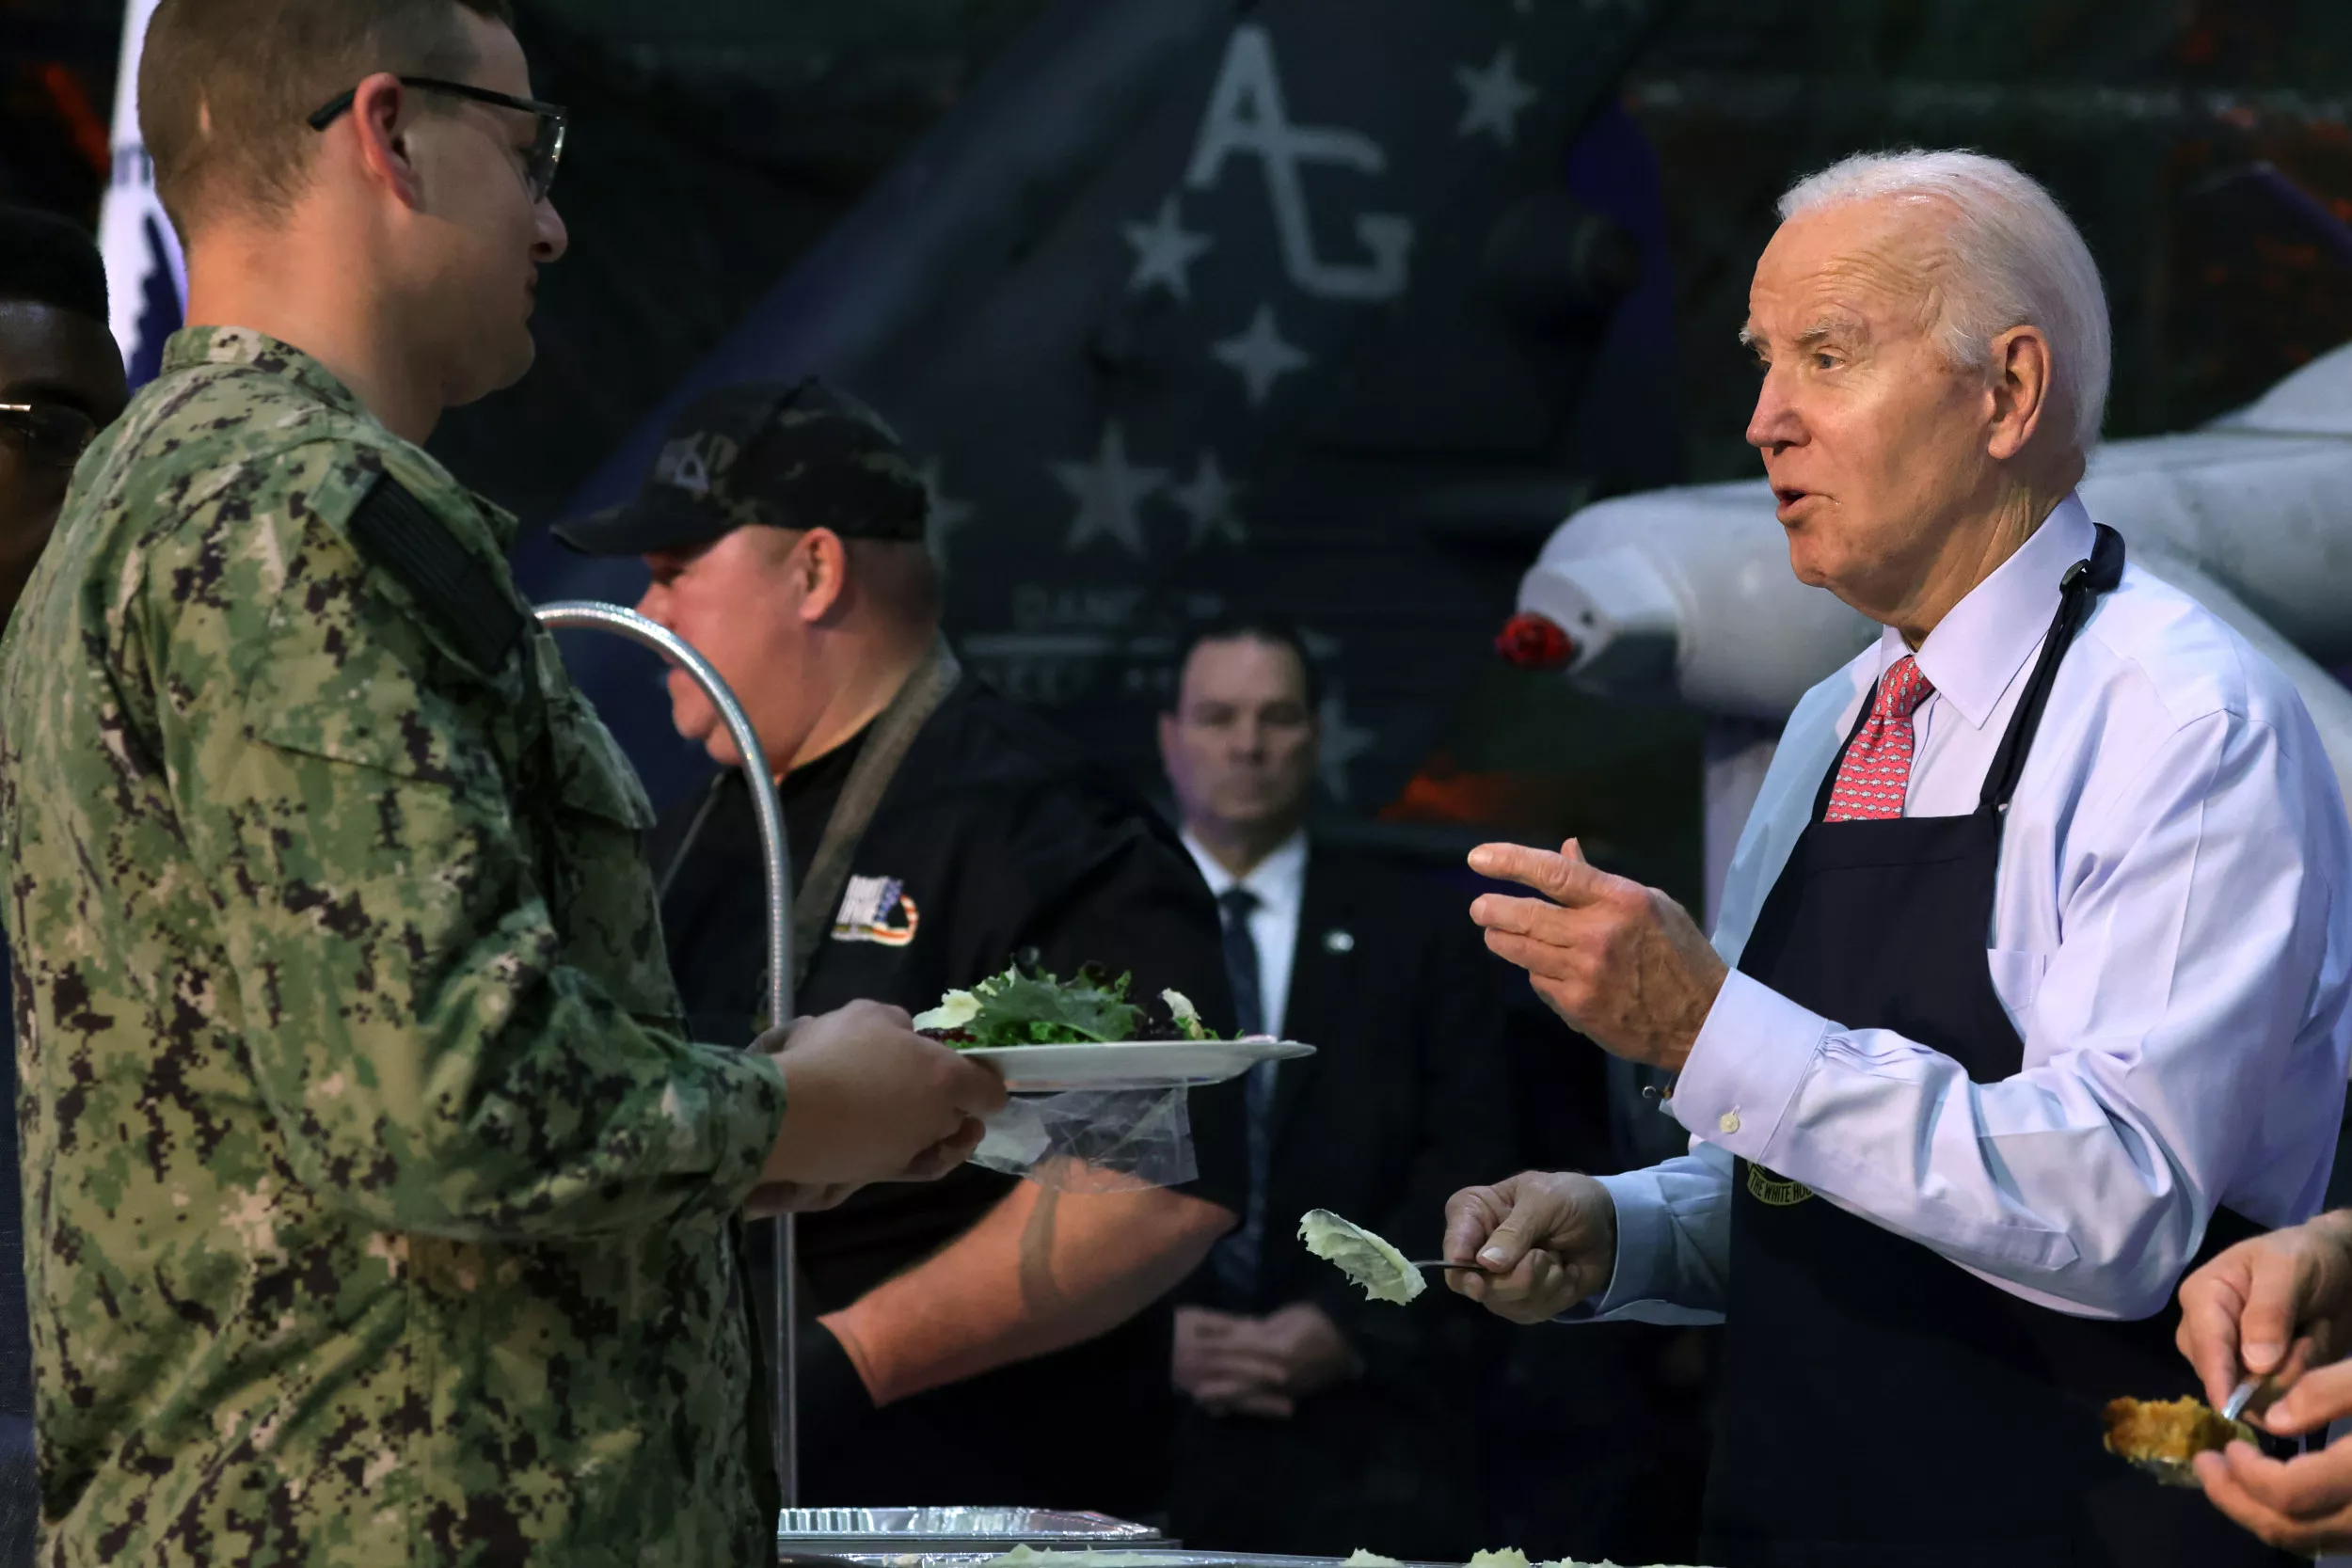 What the U.S. Military Really Thinks About Biden